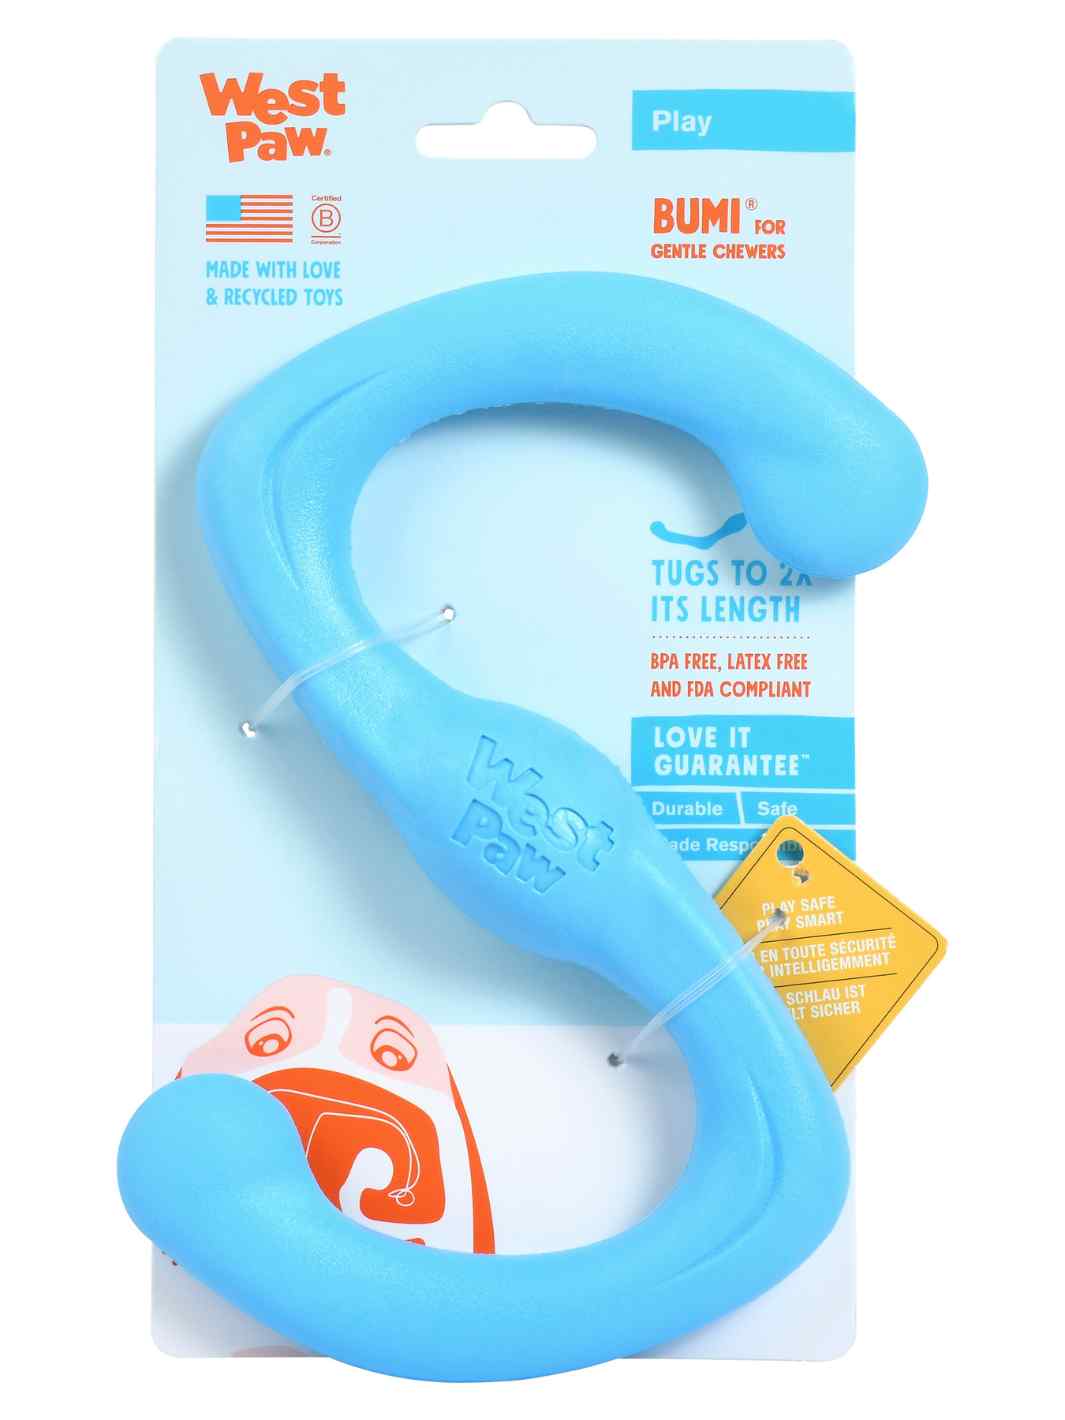 West Paw Bumi Dog Toy Front Package